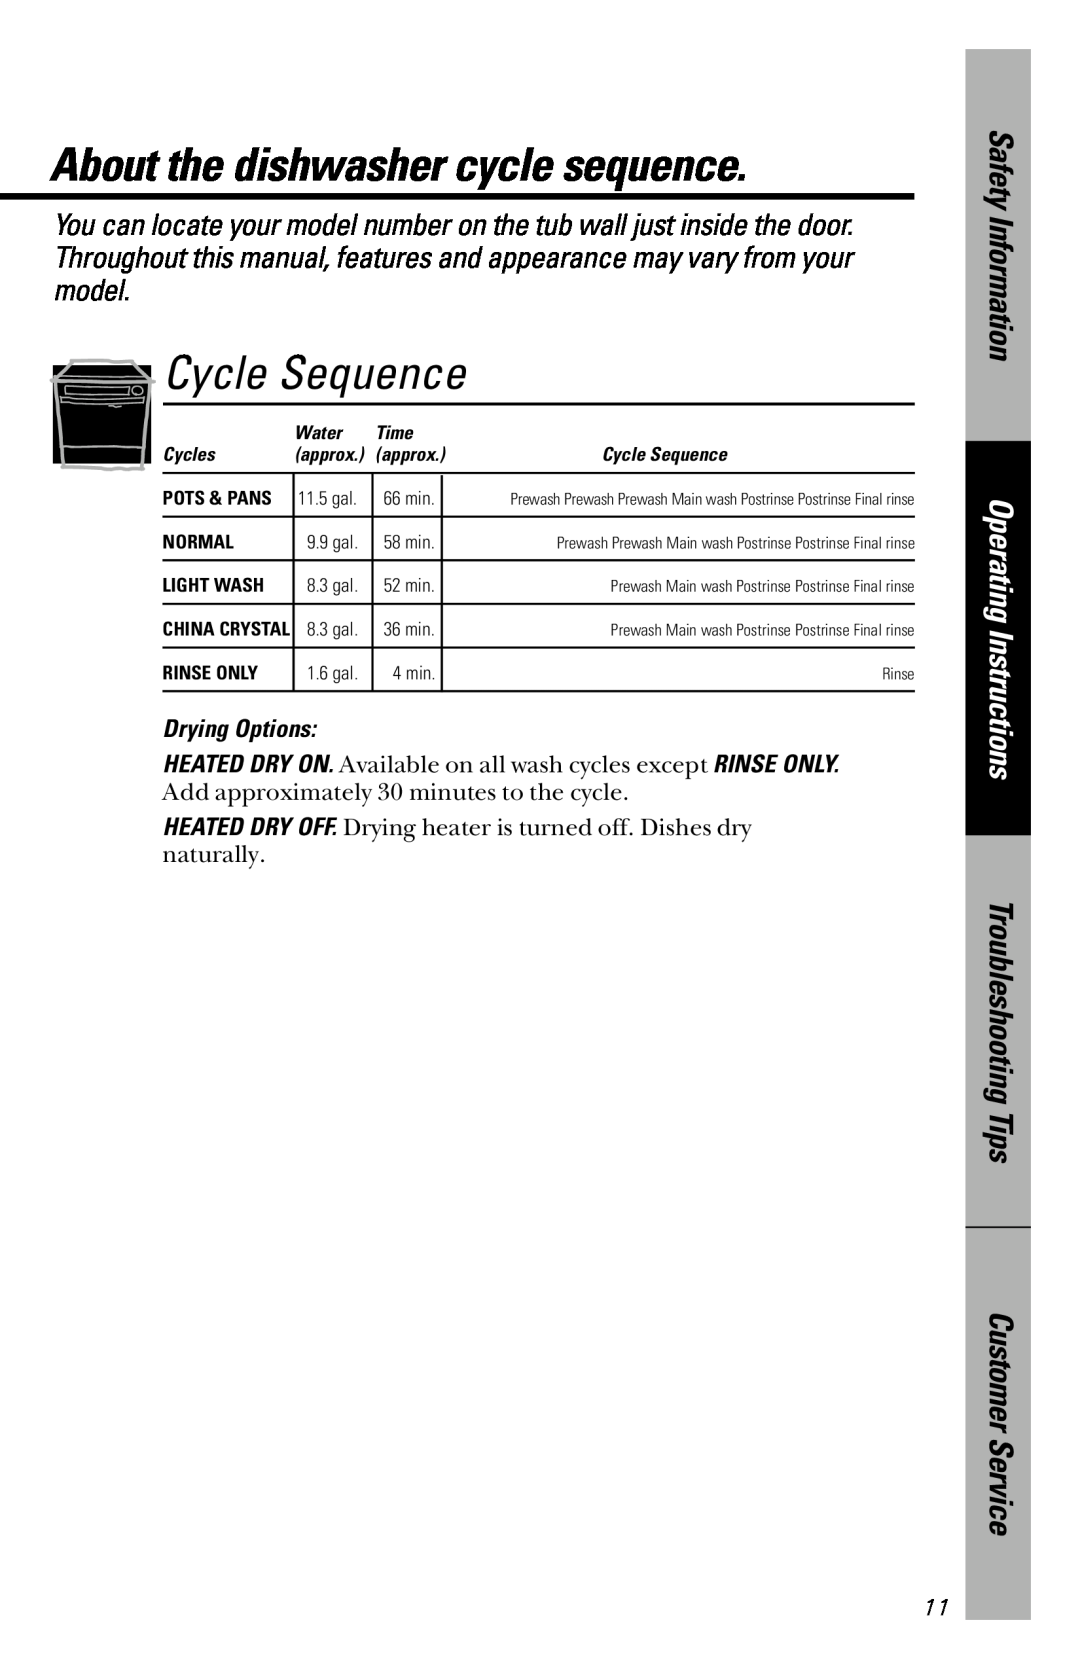 GE GSD5152 About the dishwasher cycle sequence, Cycle Sequence, Drying Options, Safety Information, Operating Instructions 